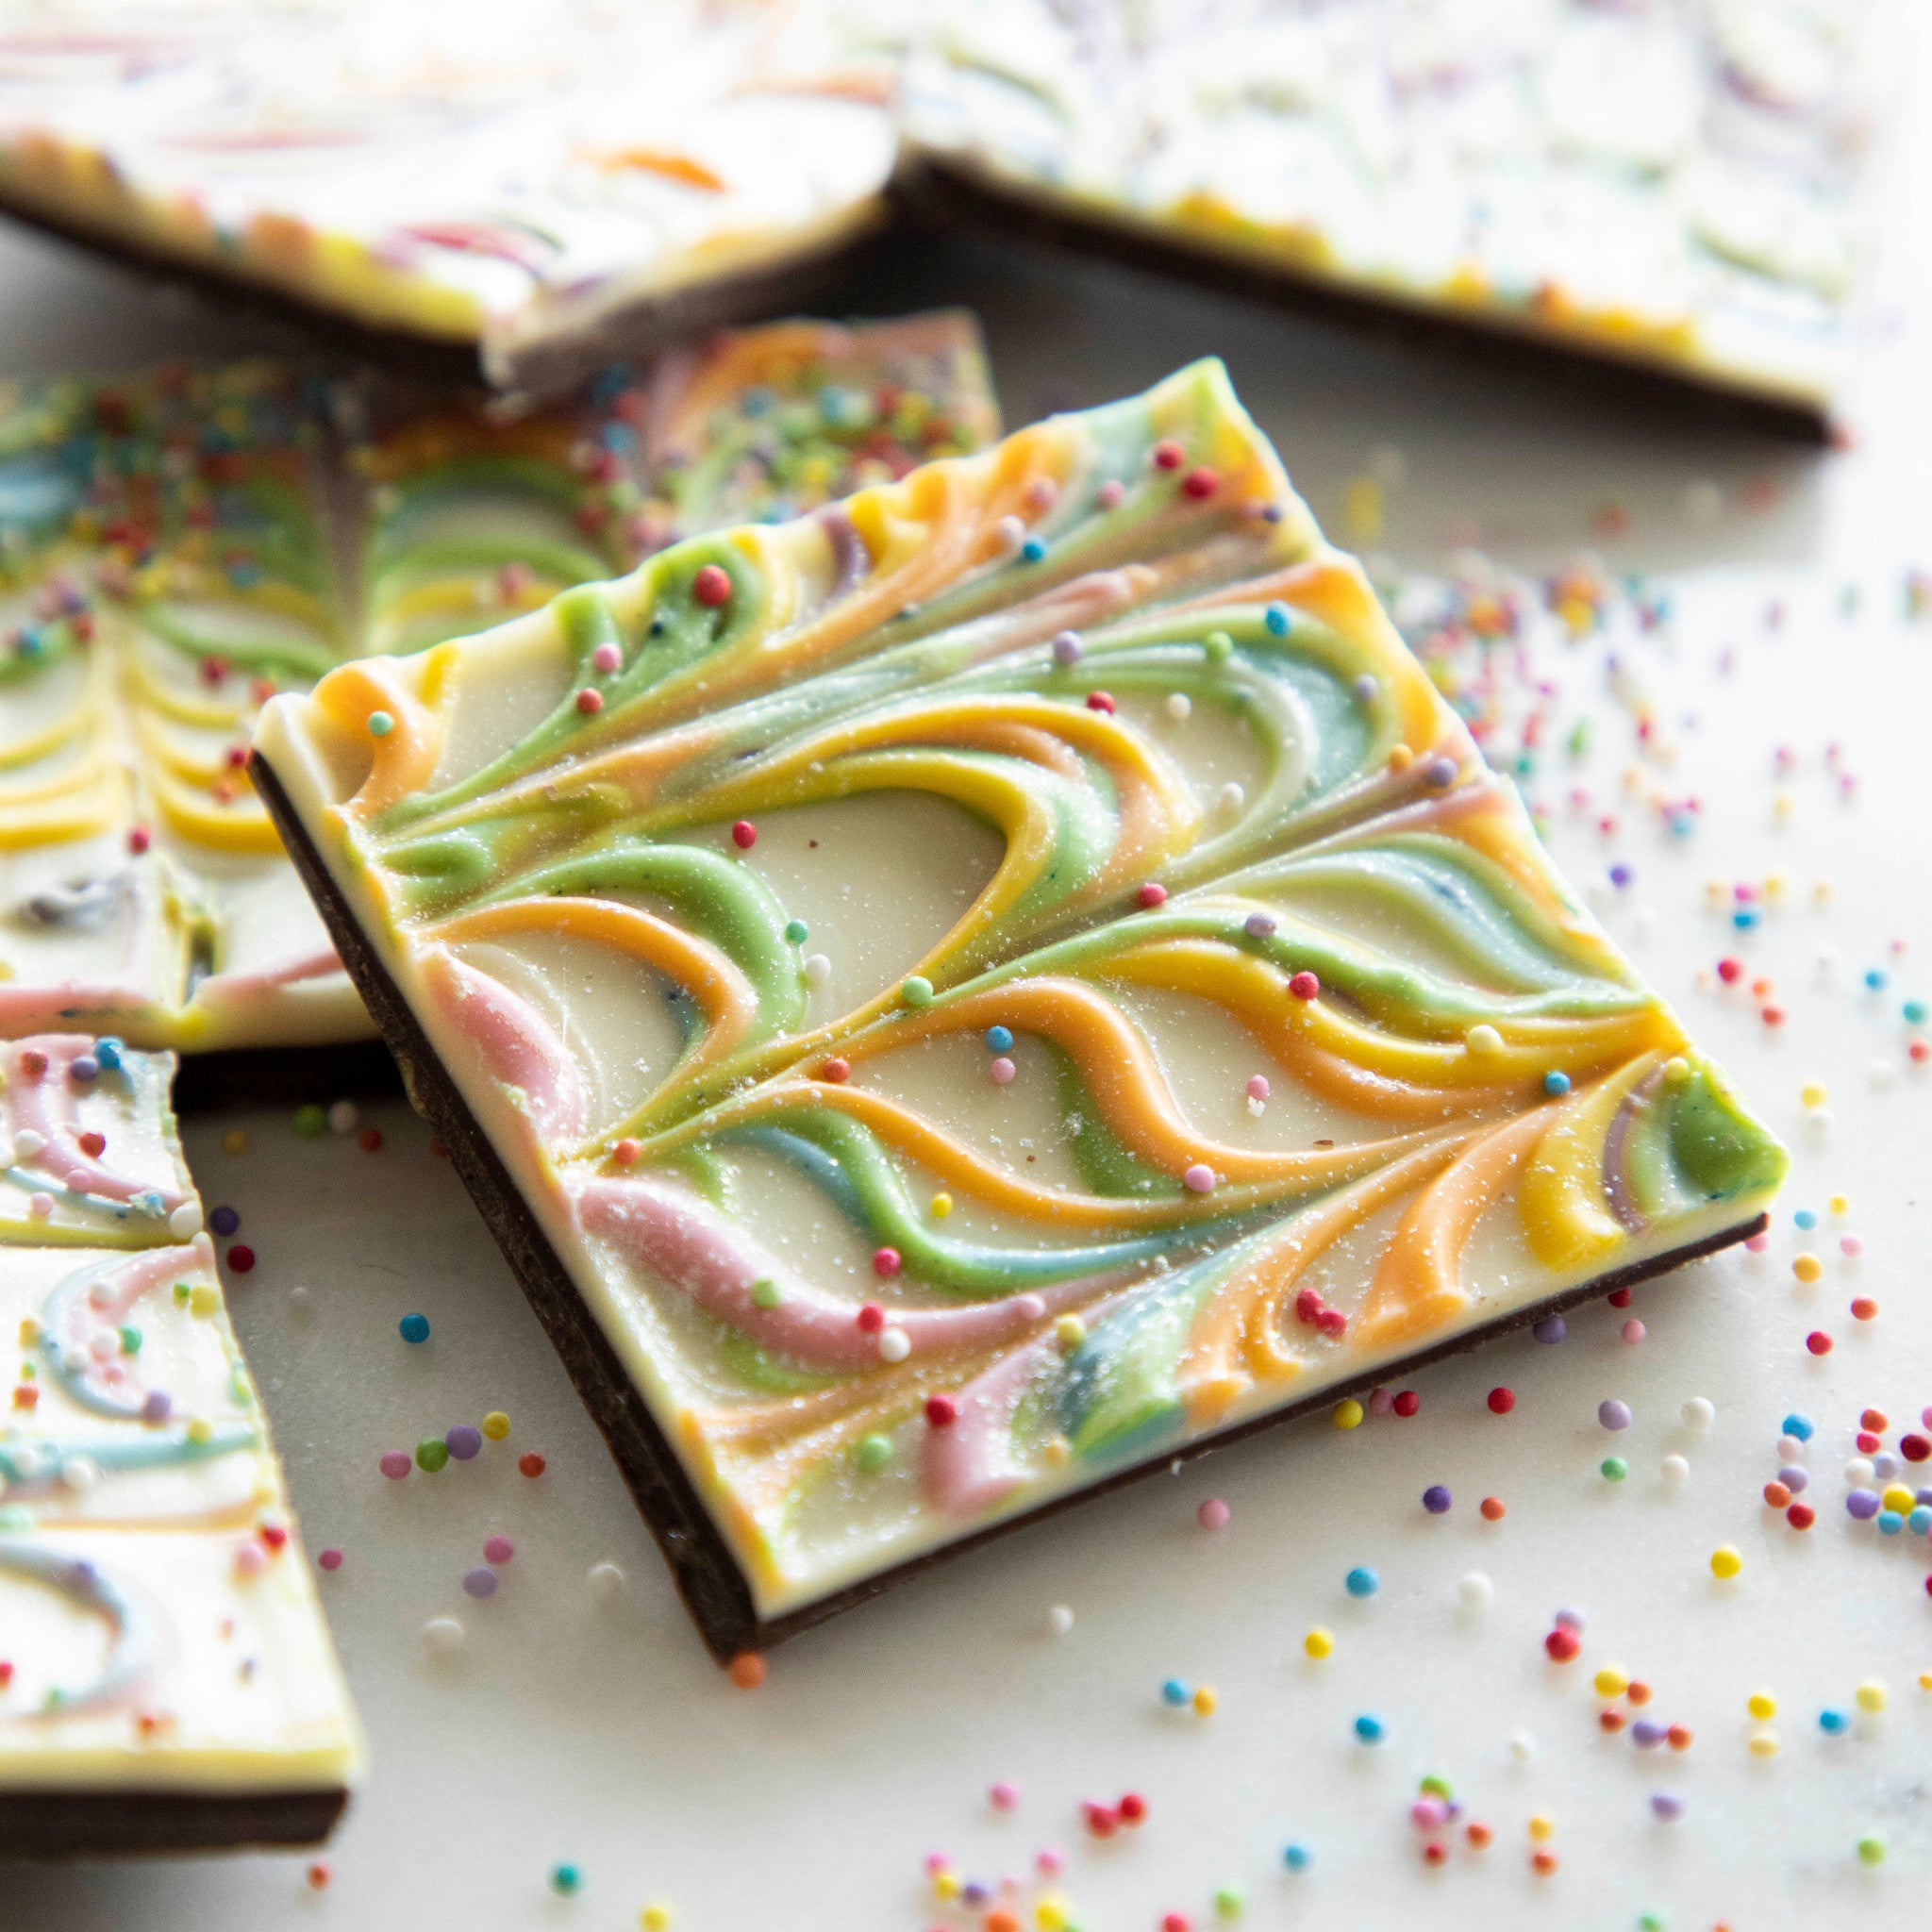 A Gluten-free Rainbow Bark with colorful swirls and sprinkles, known as Hester &amp; Cook.